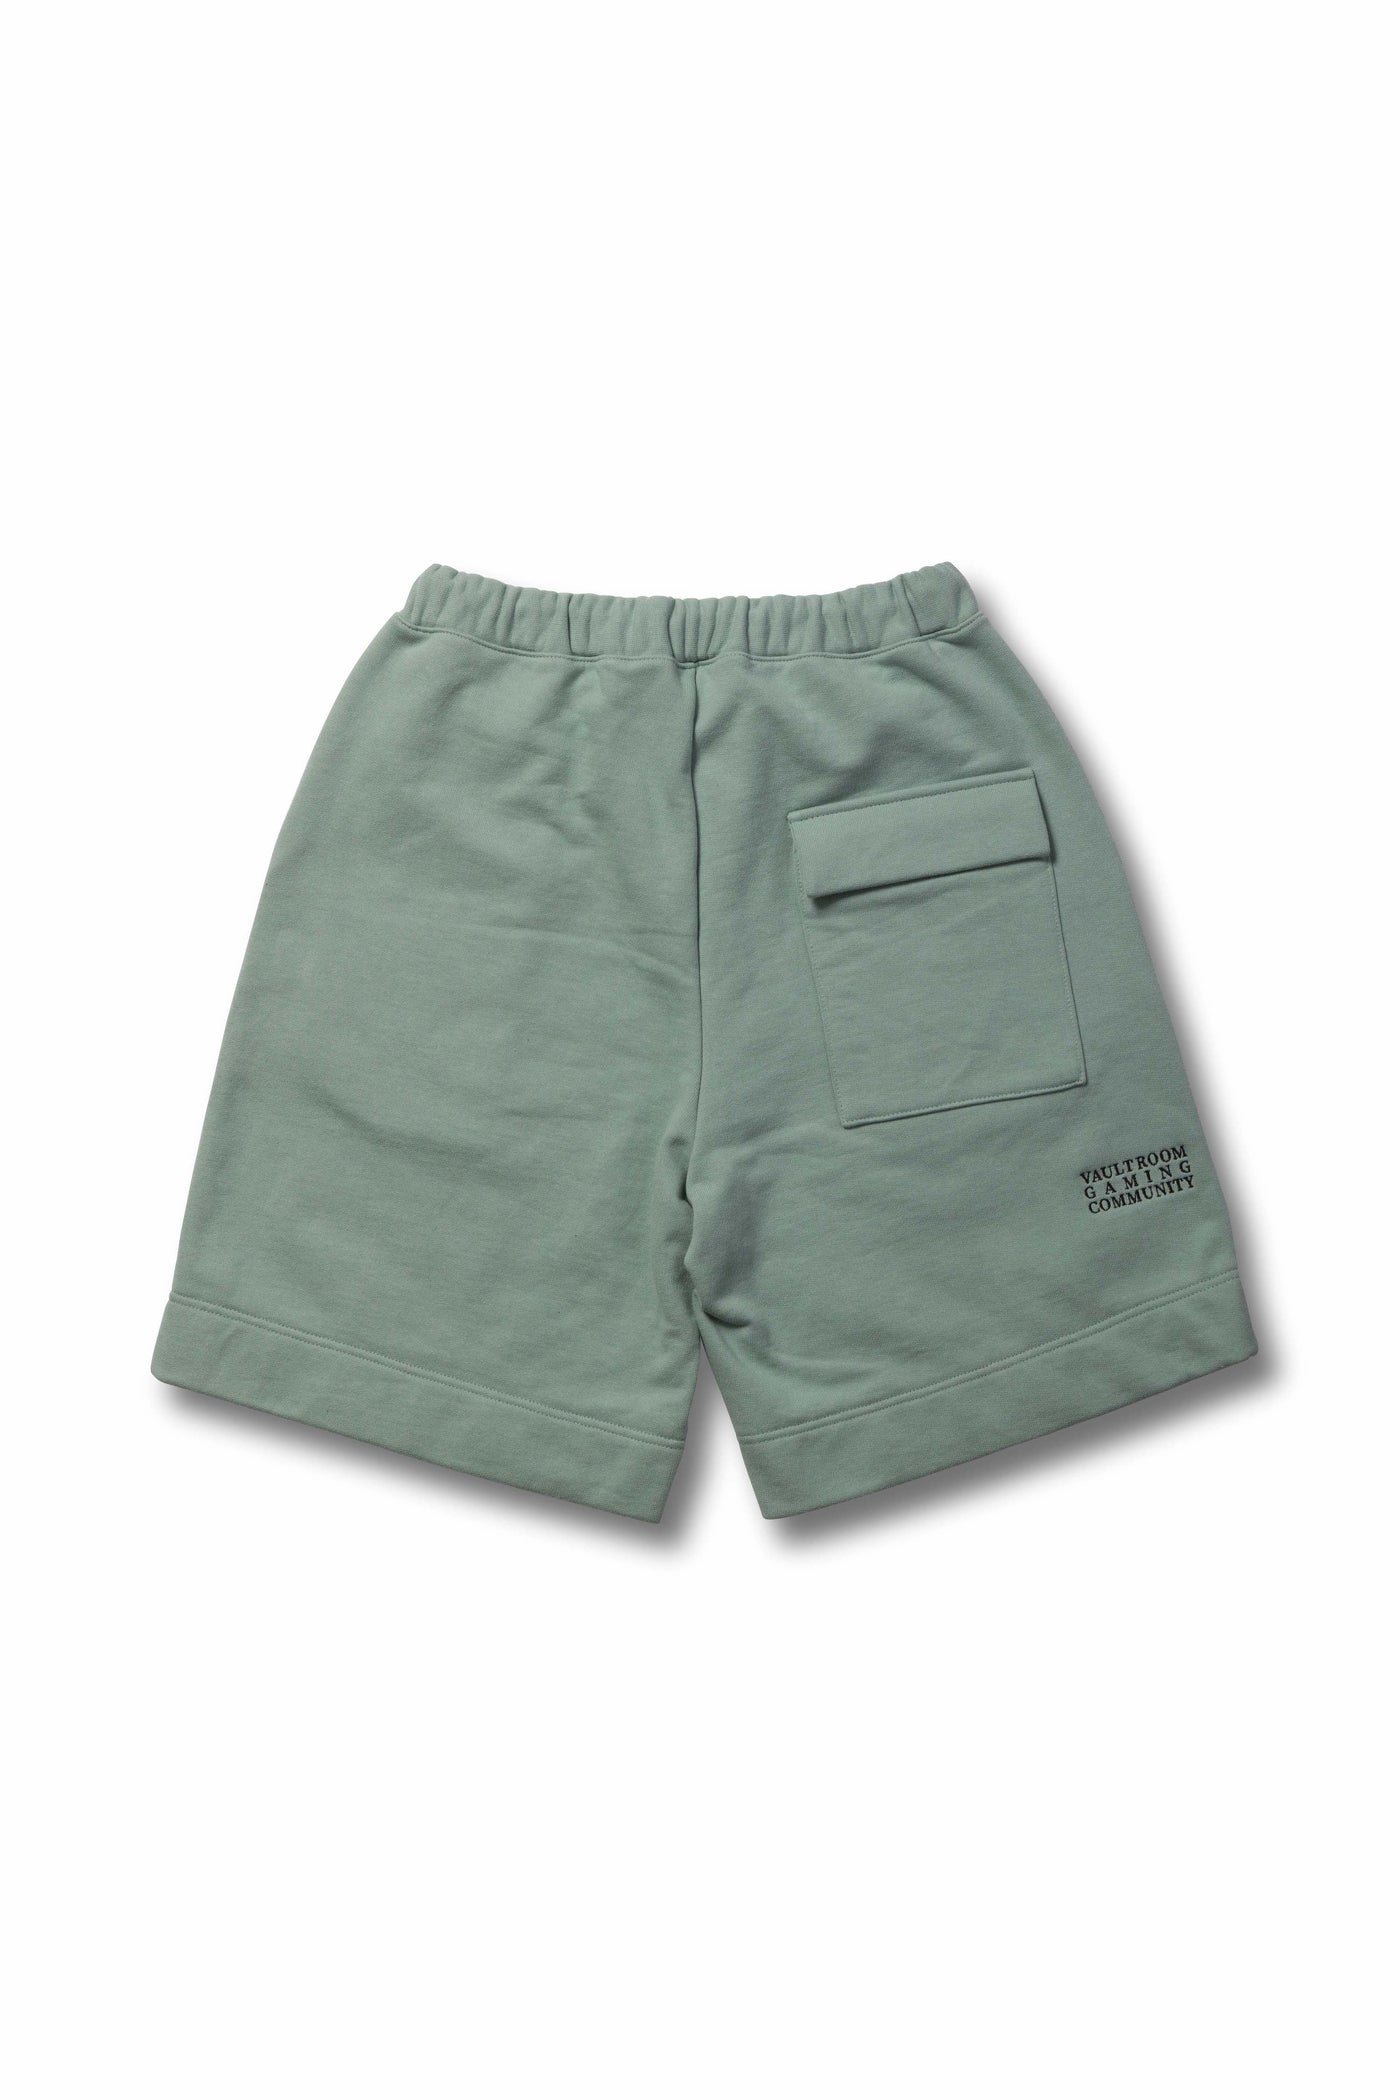 VAULT ROOM // VGC FRENCH TERRY SHORTS | decisionmakerpanel.co.uk